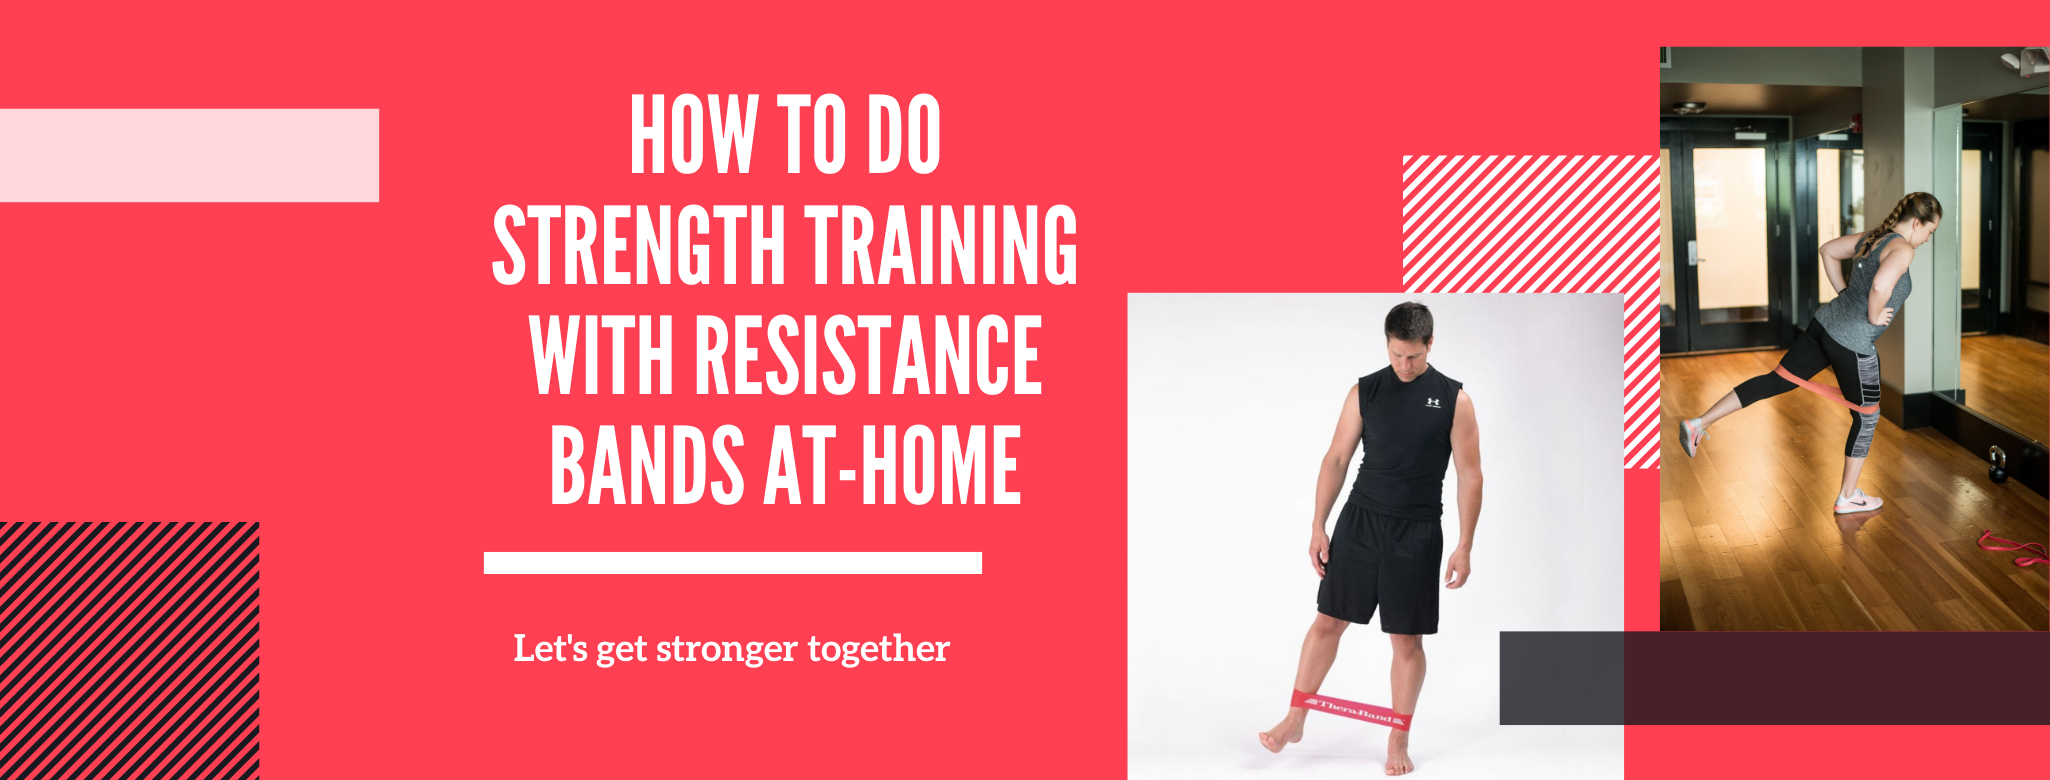 How to Do Strength Training With Resistance Bands At-Home